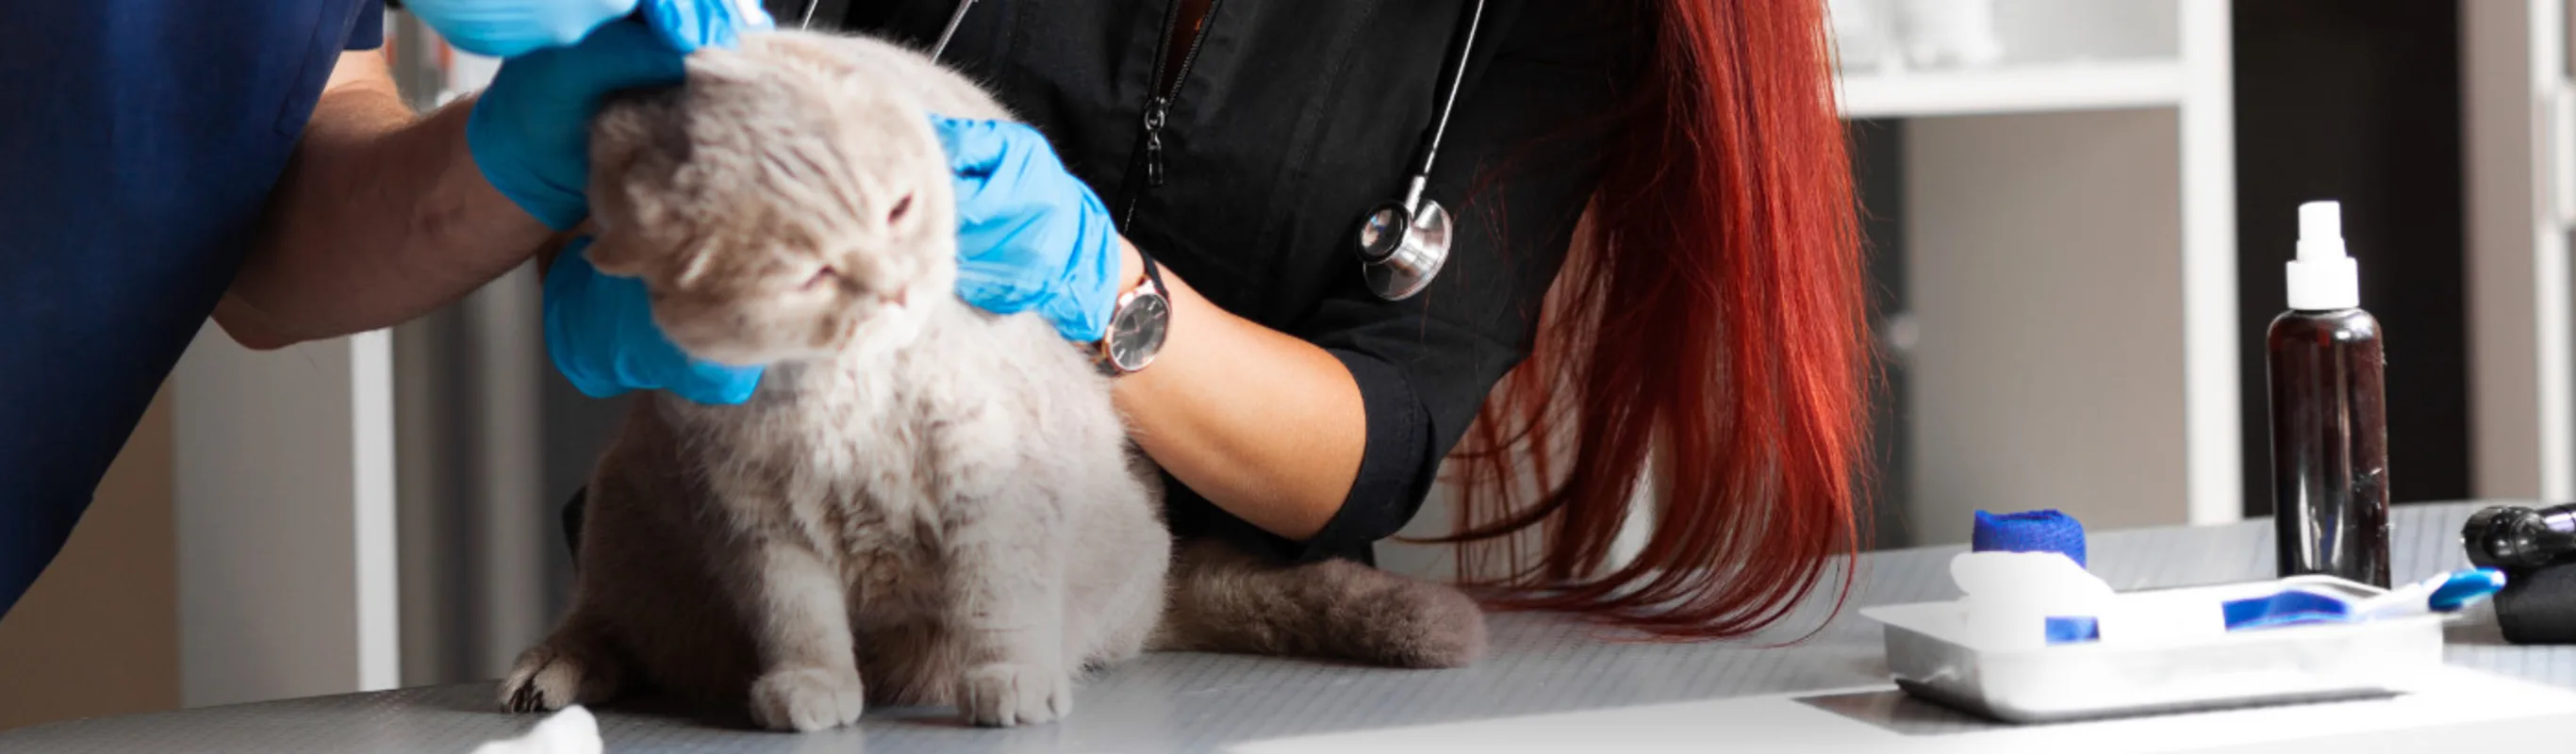 Veterinarians Caring for a Gray Cat